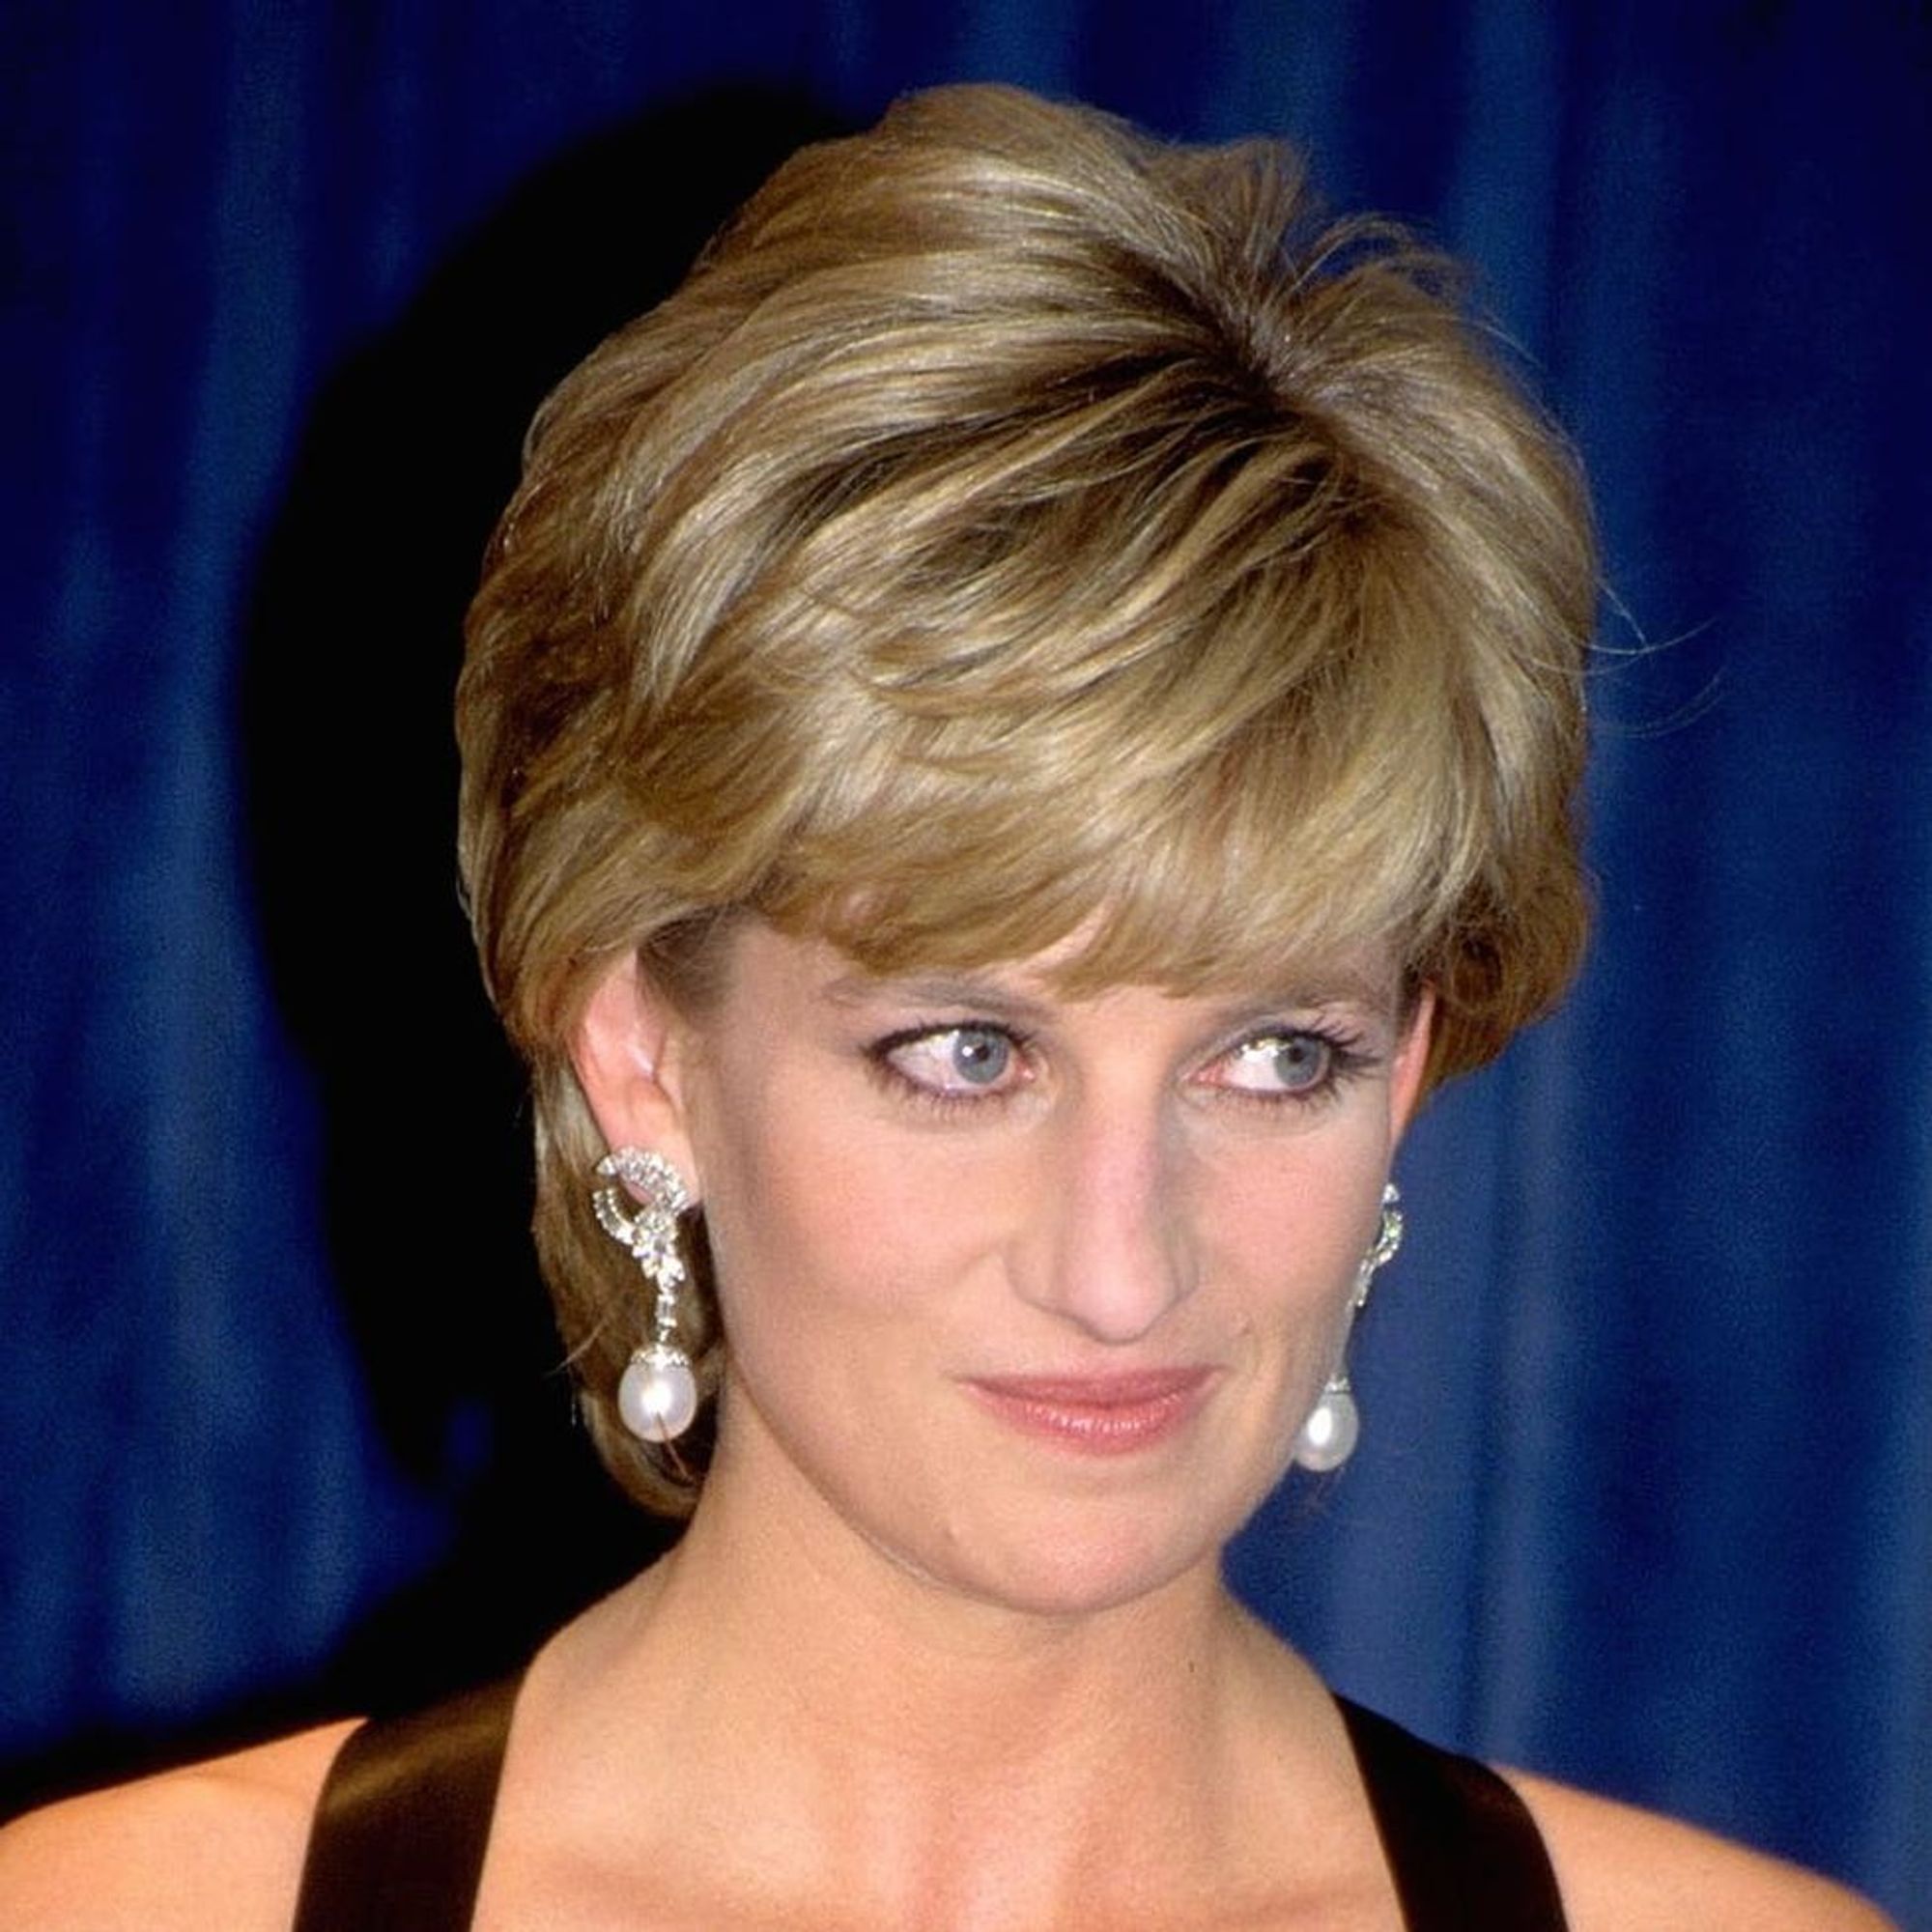 This Lush Beauty Product Was Inspired by Princess Diana - Brit + Co